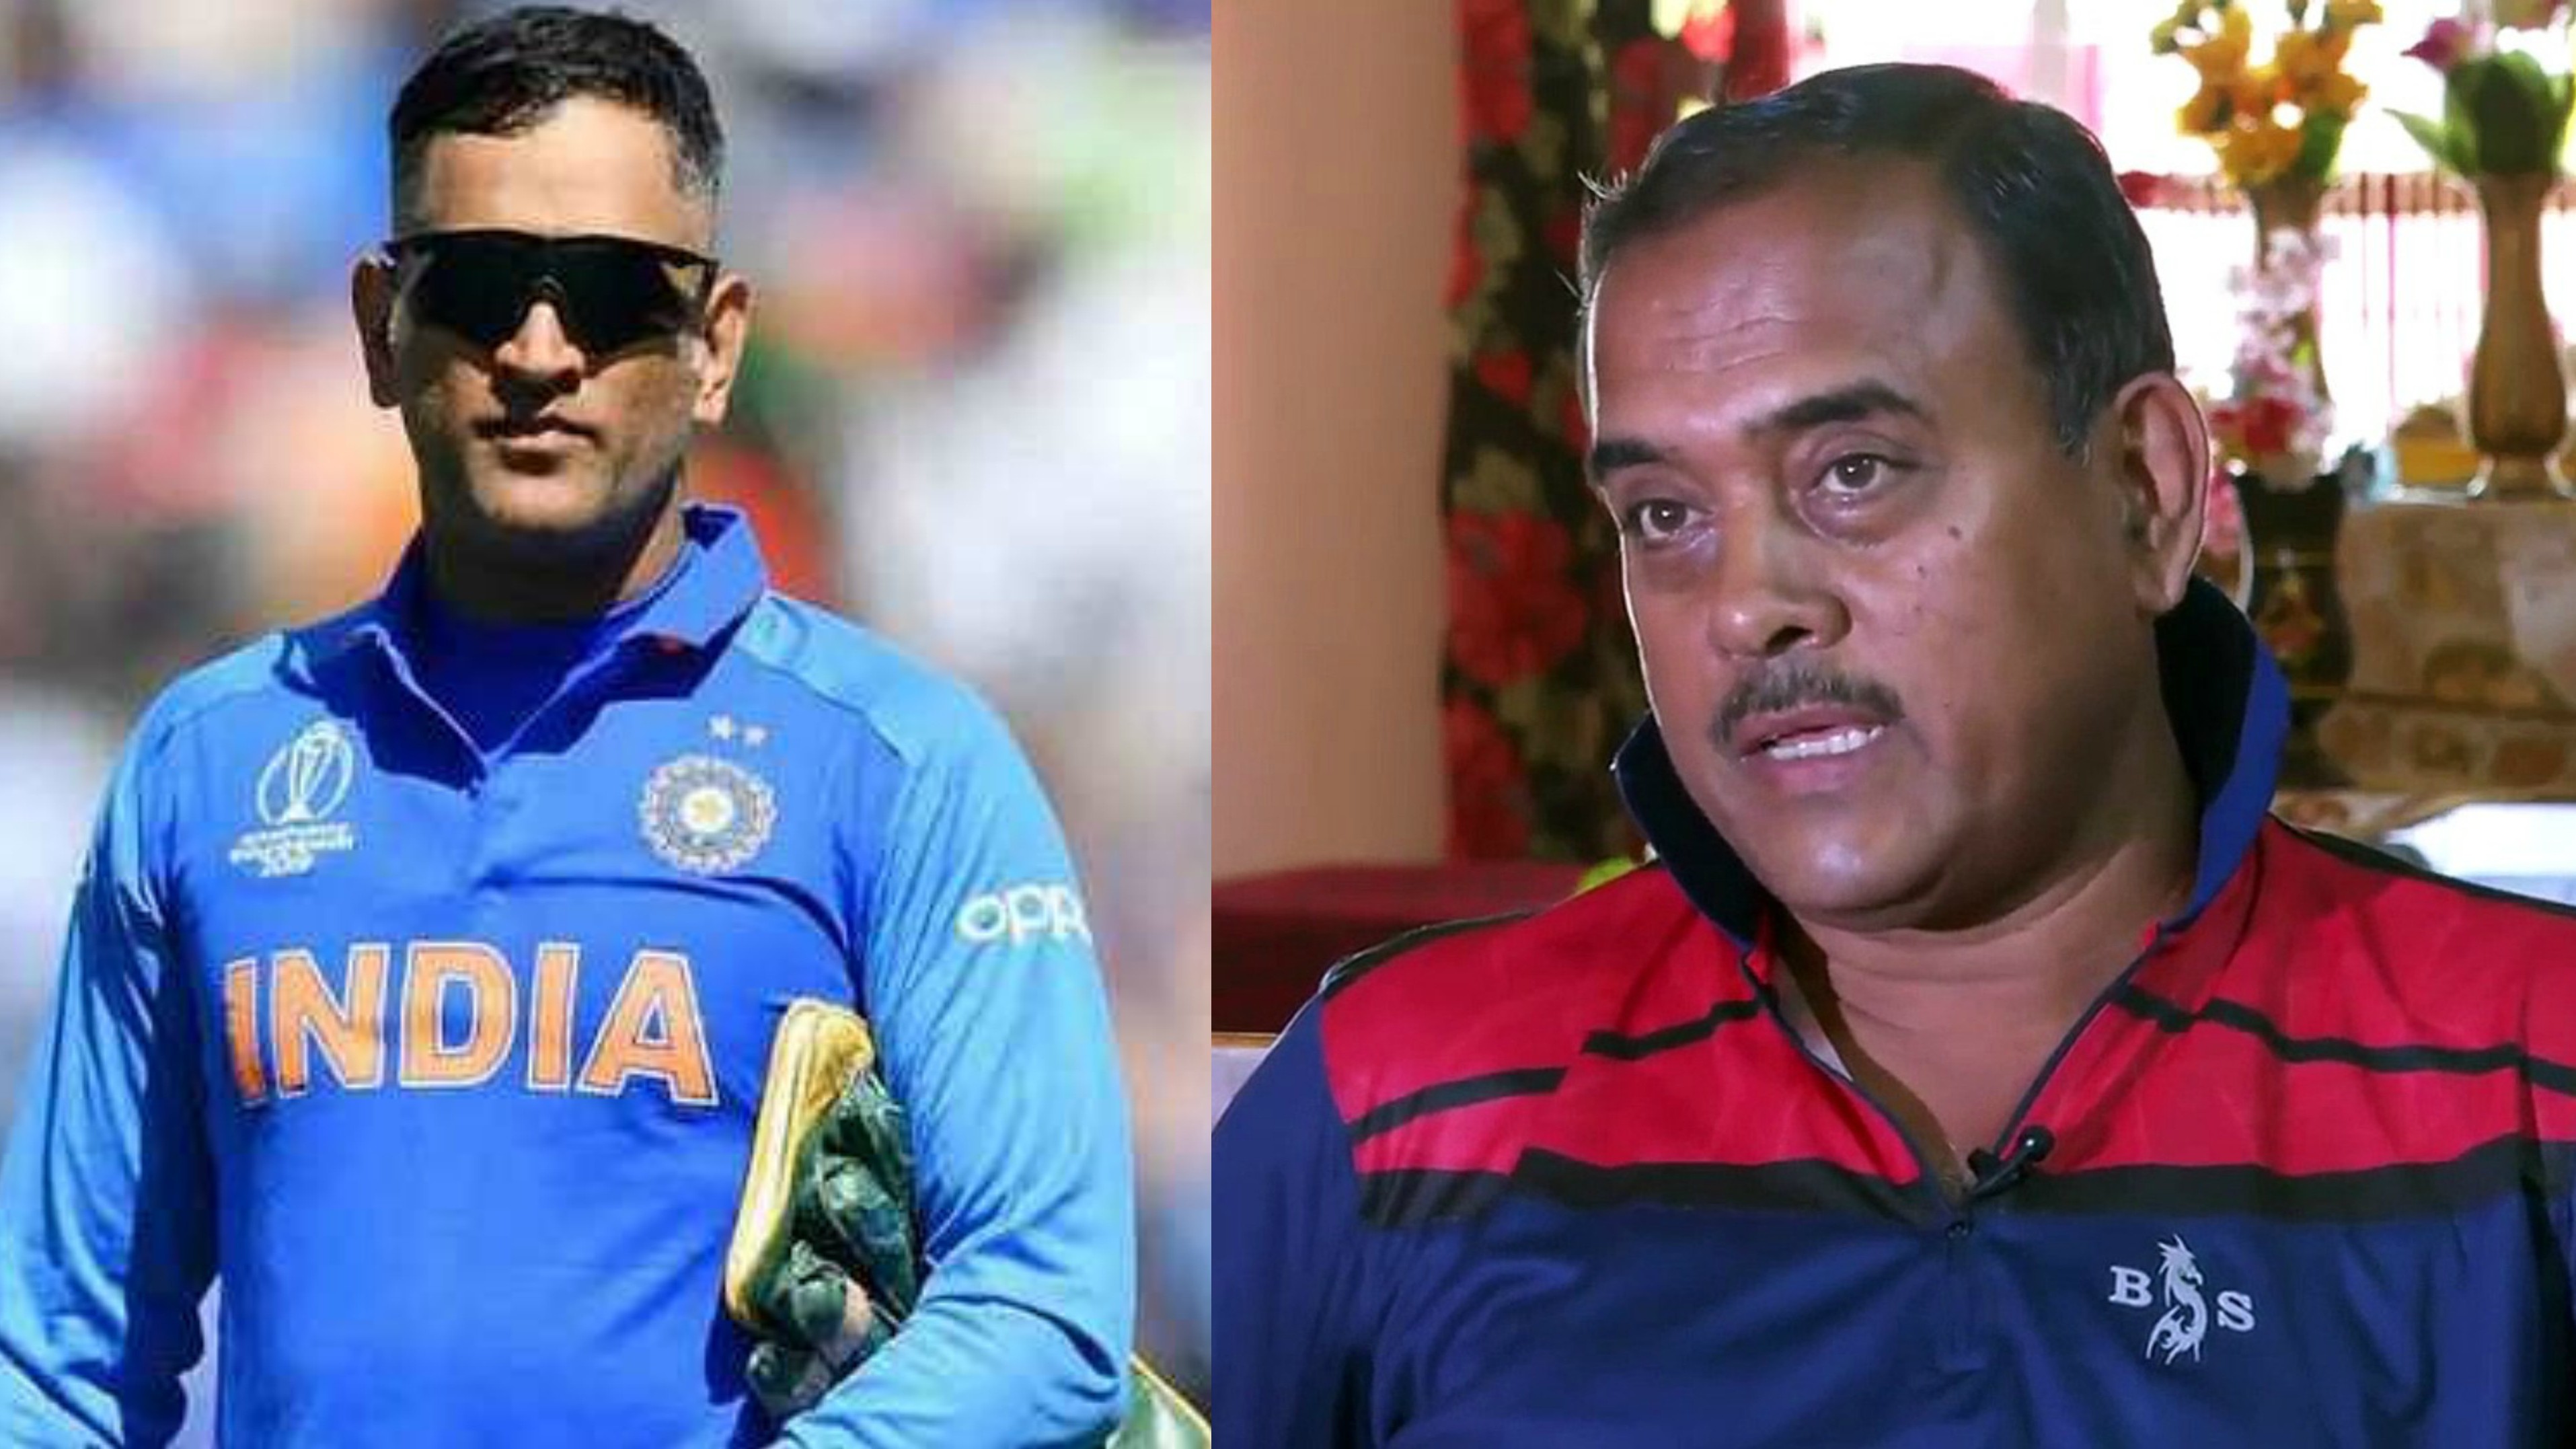 Media criticism and speculations played a role in MS Dhoni’s retirement, says 